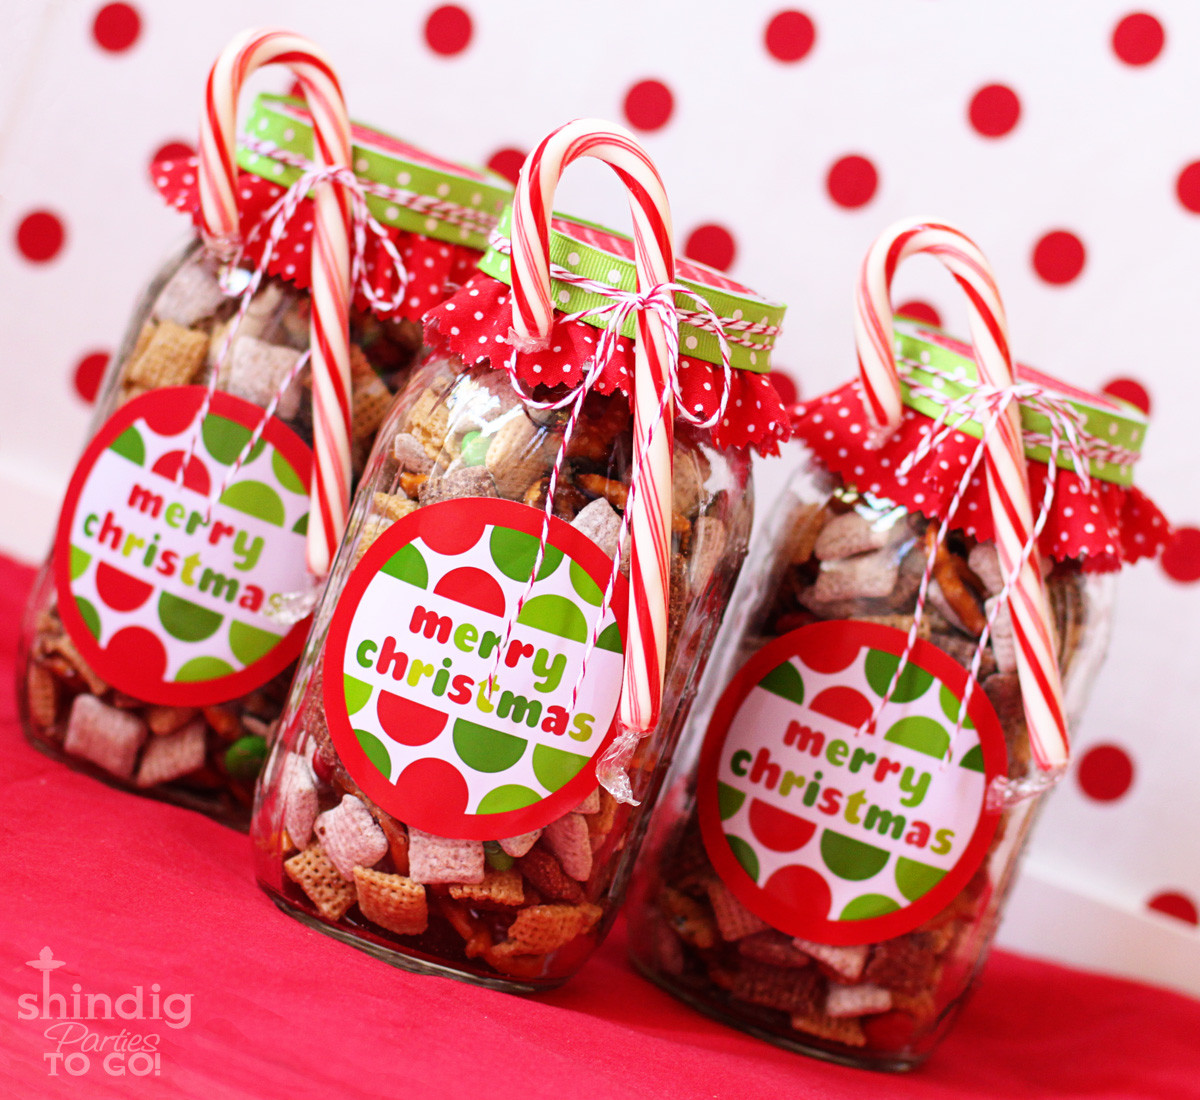 Holiday Candy Gift Ideas
 How To Make Handmade Chex Mix Holiday Gifts & Bonus Free Printable